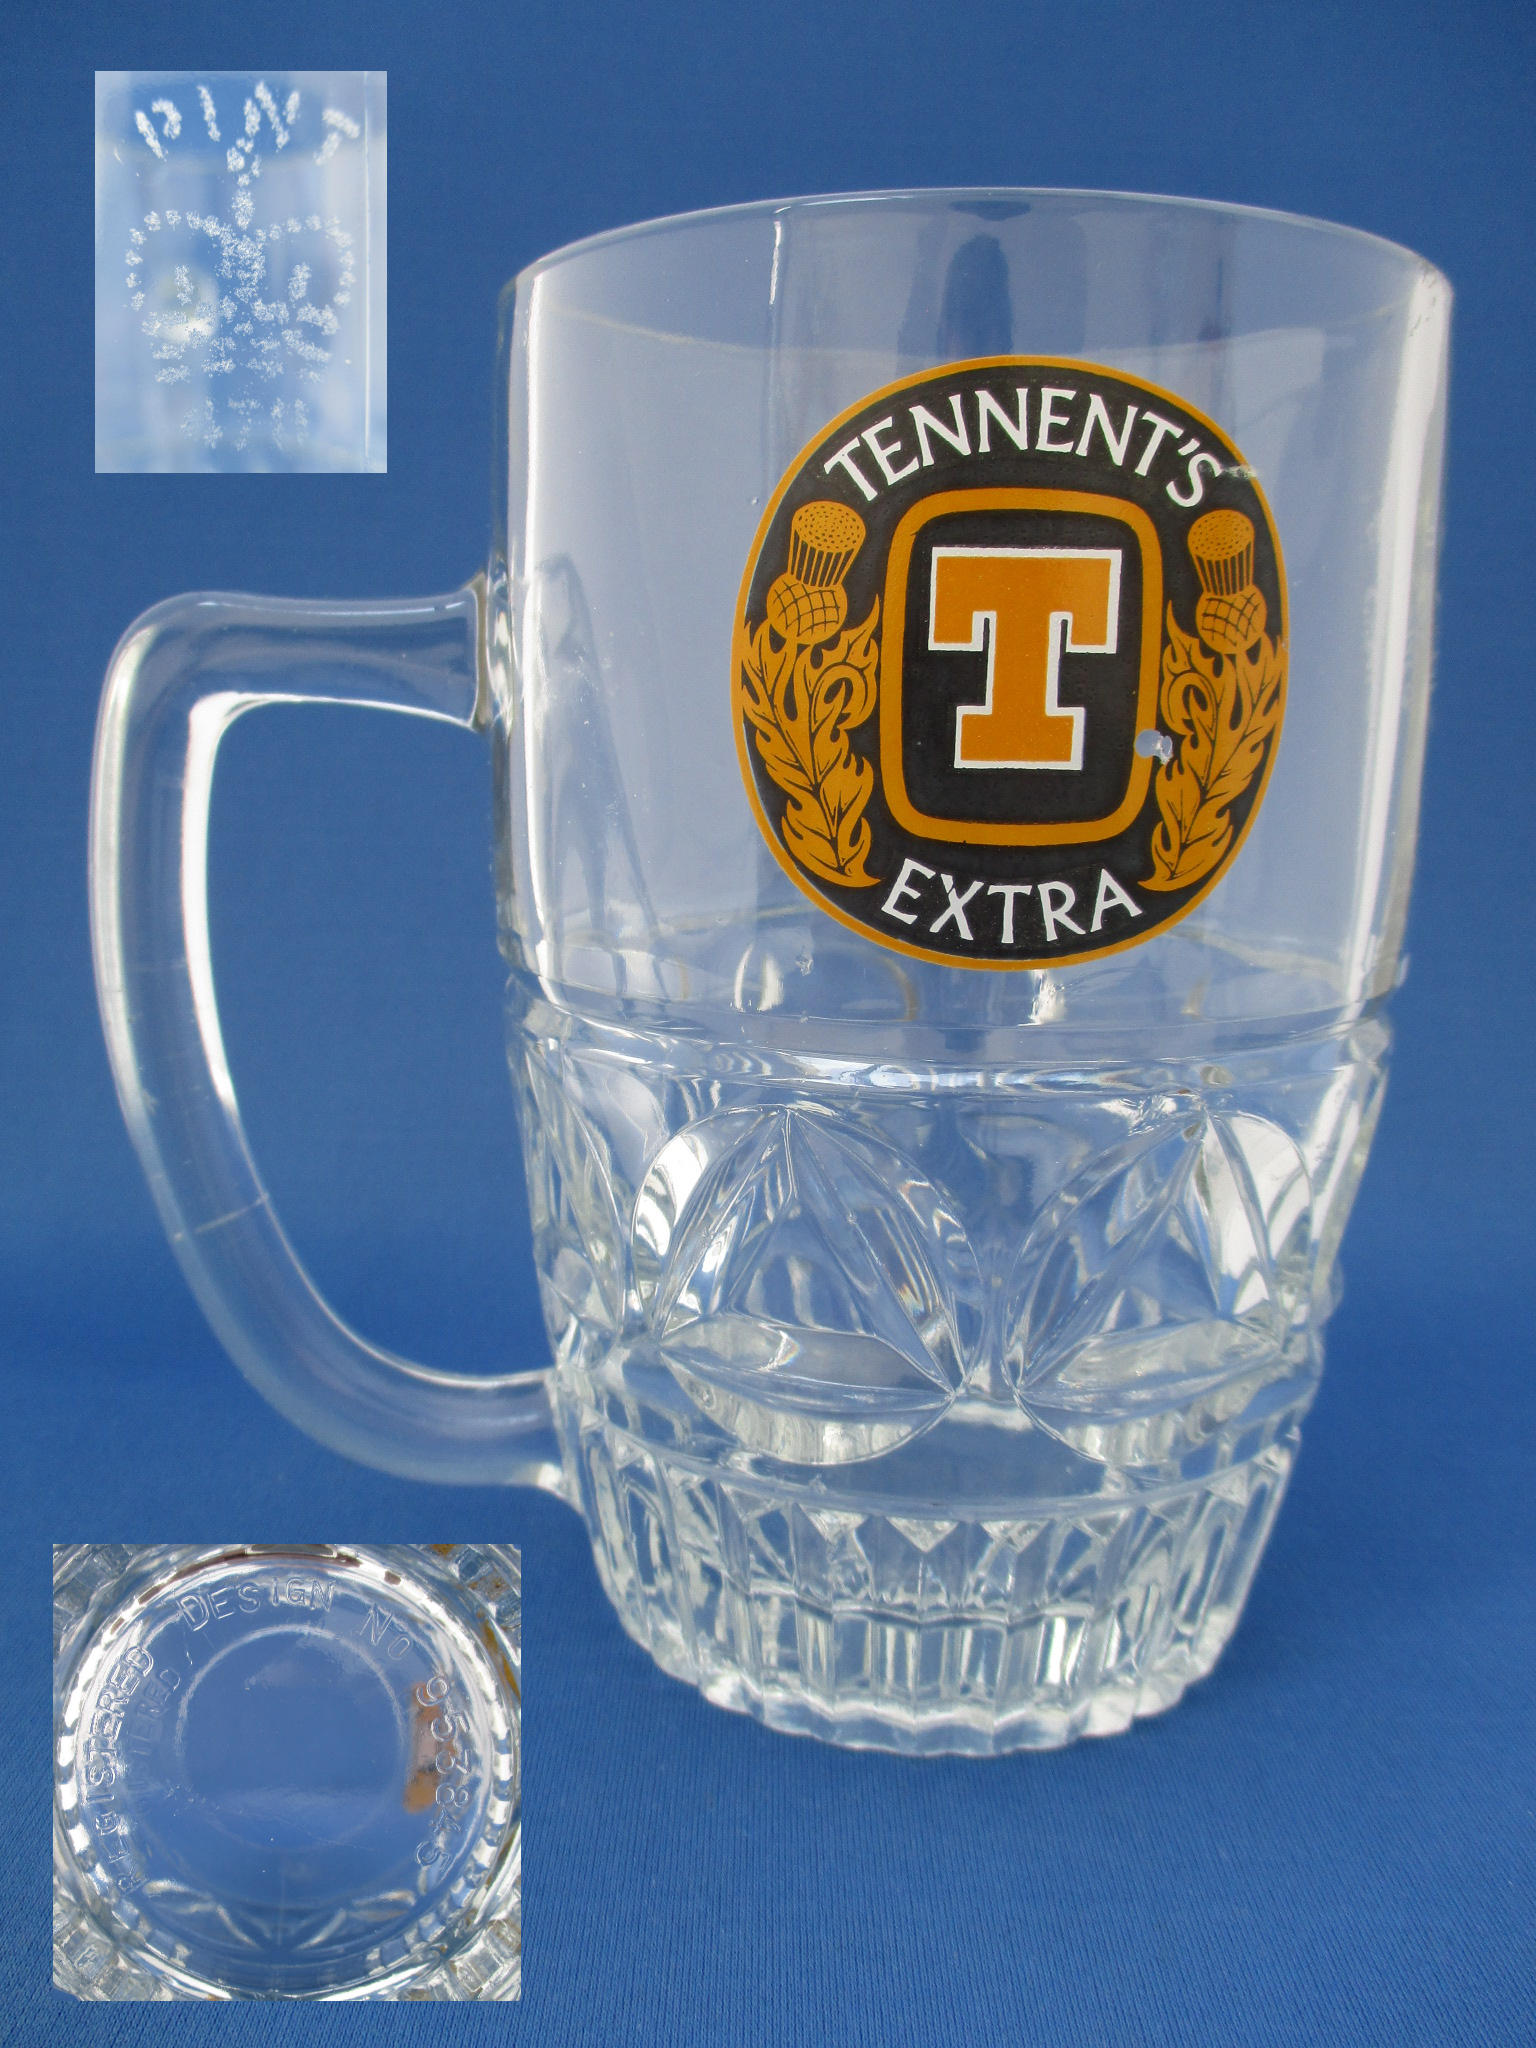 Tennent's Extra Beer Glass